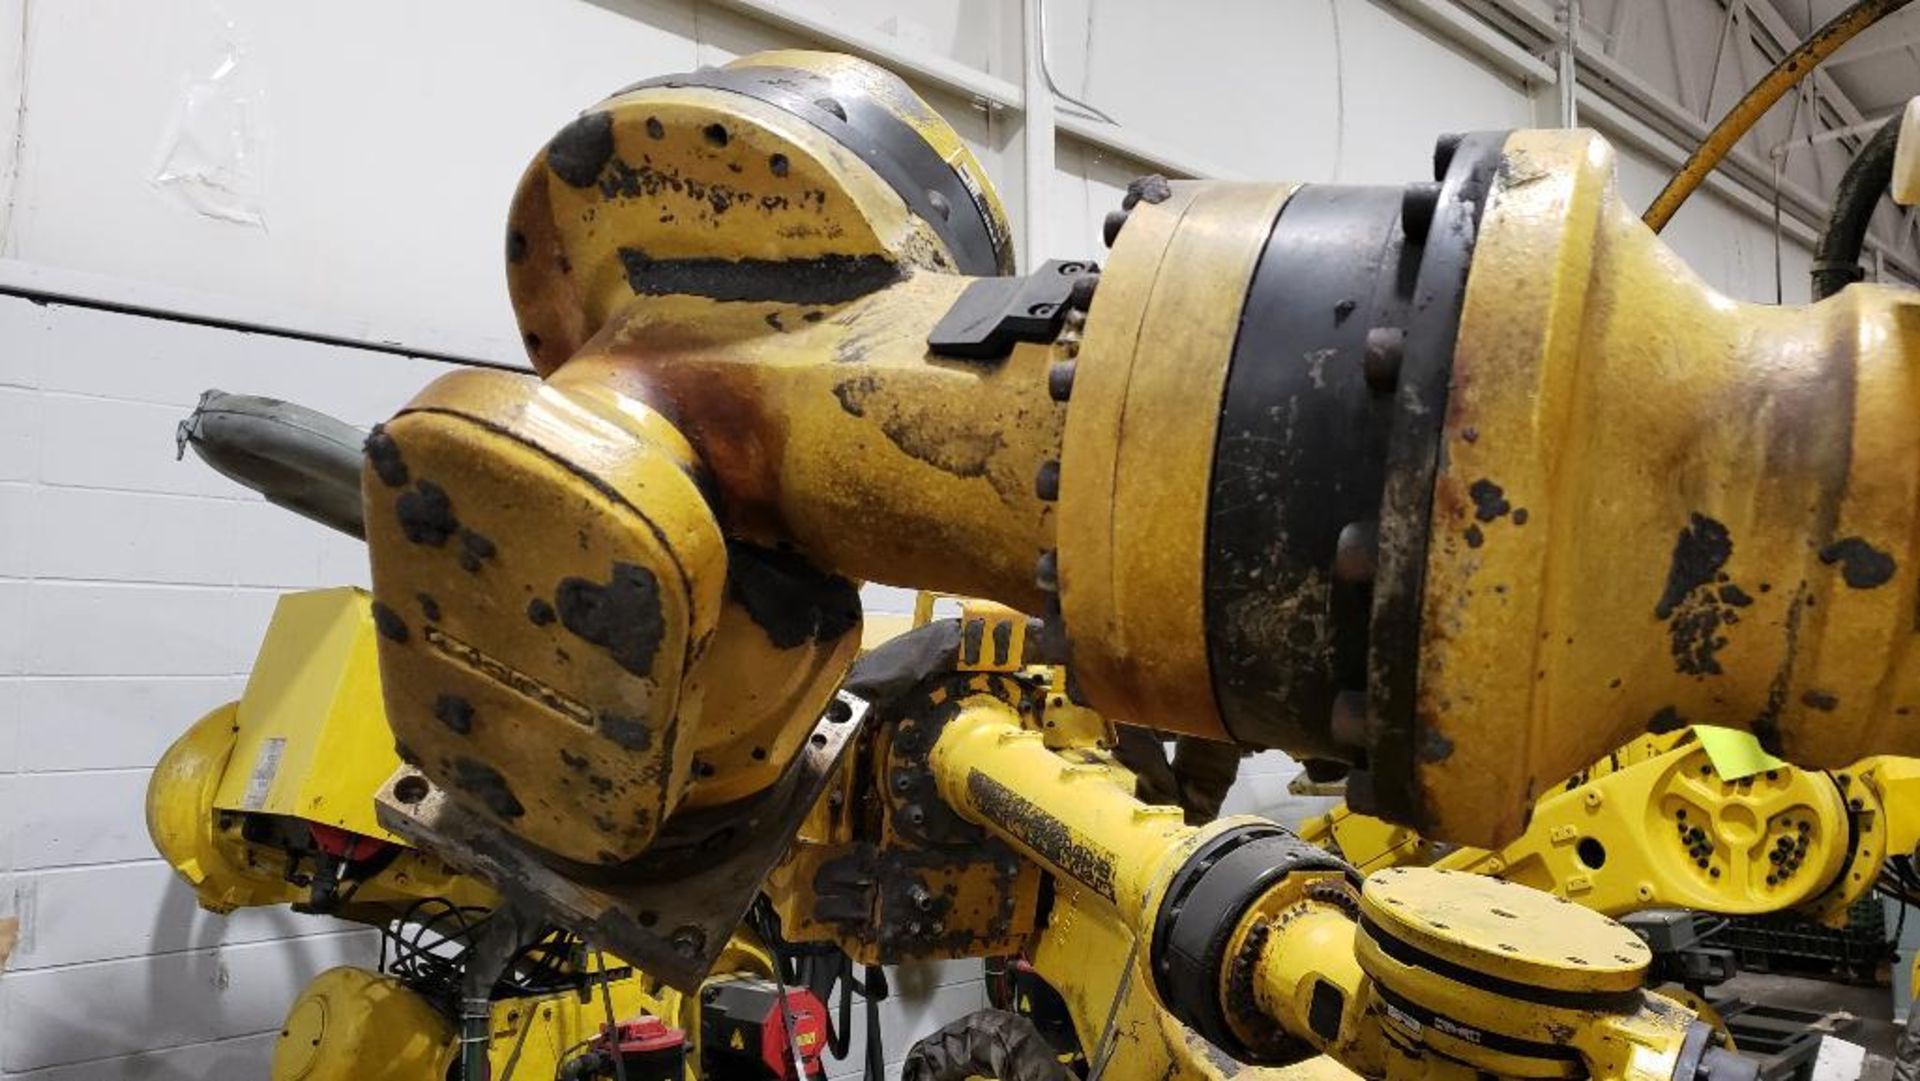 Fanuc R-2000iA/200F robot with Fanuc System R-J3iB controller. - Image 4 of 14